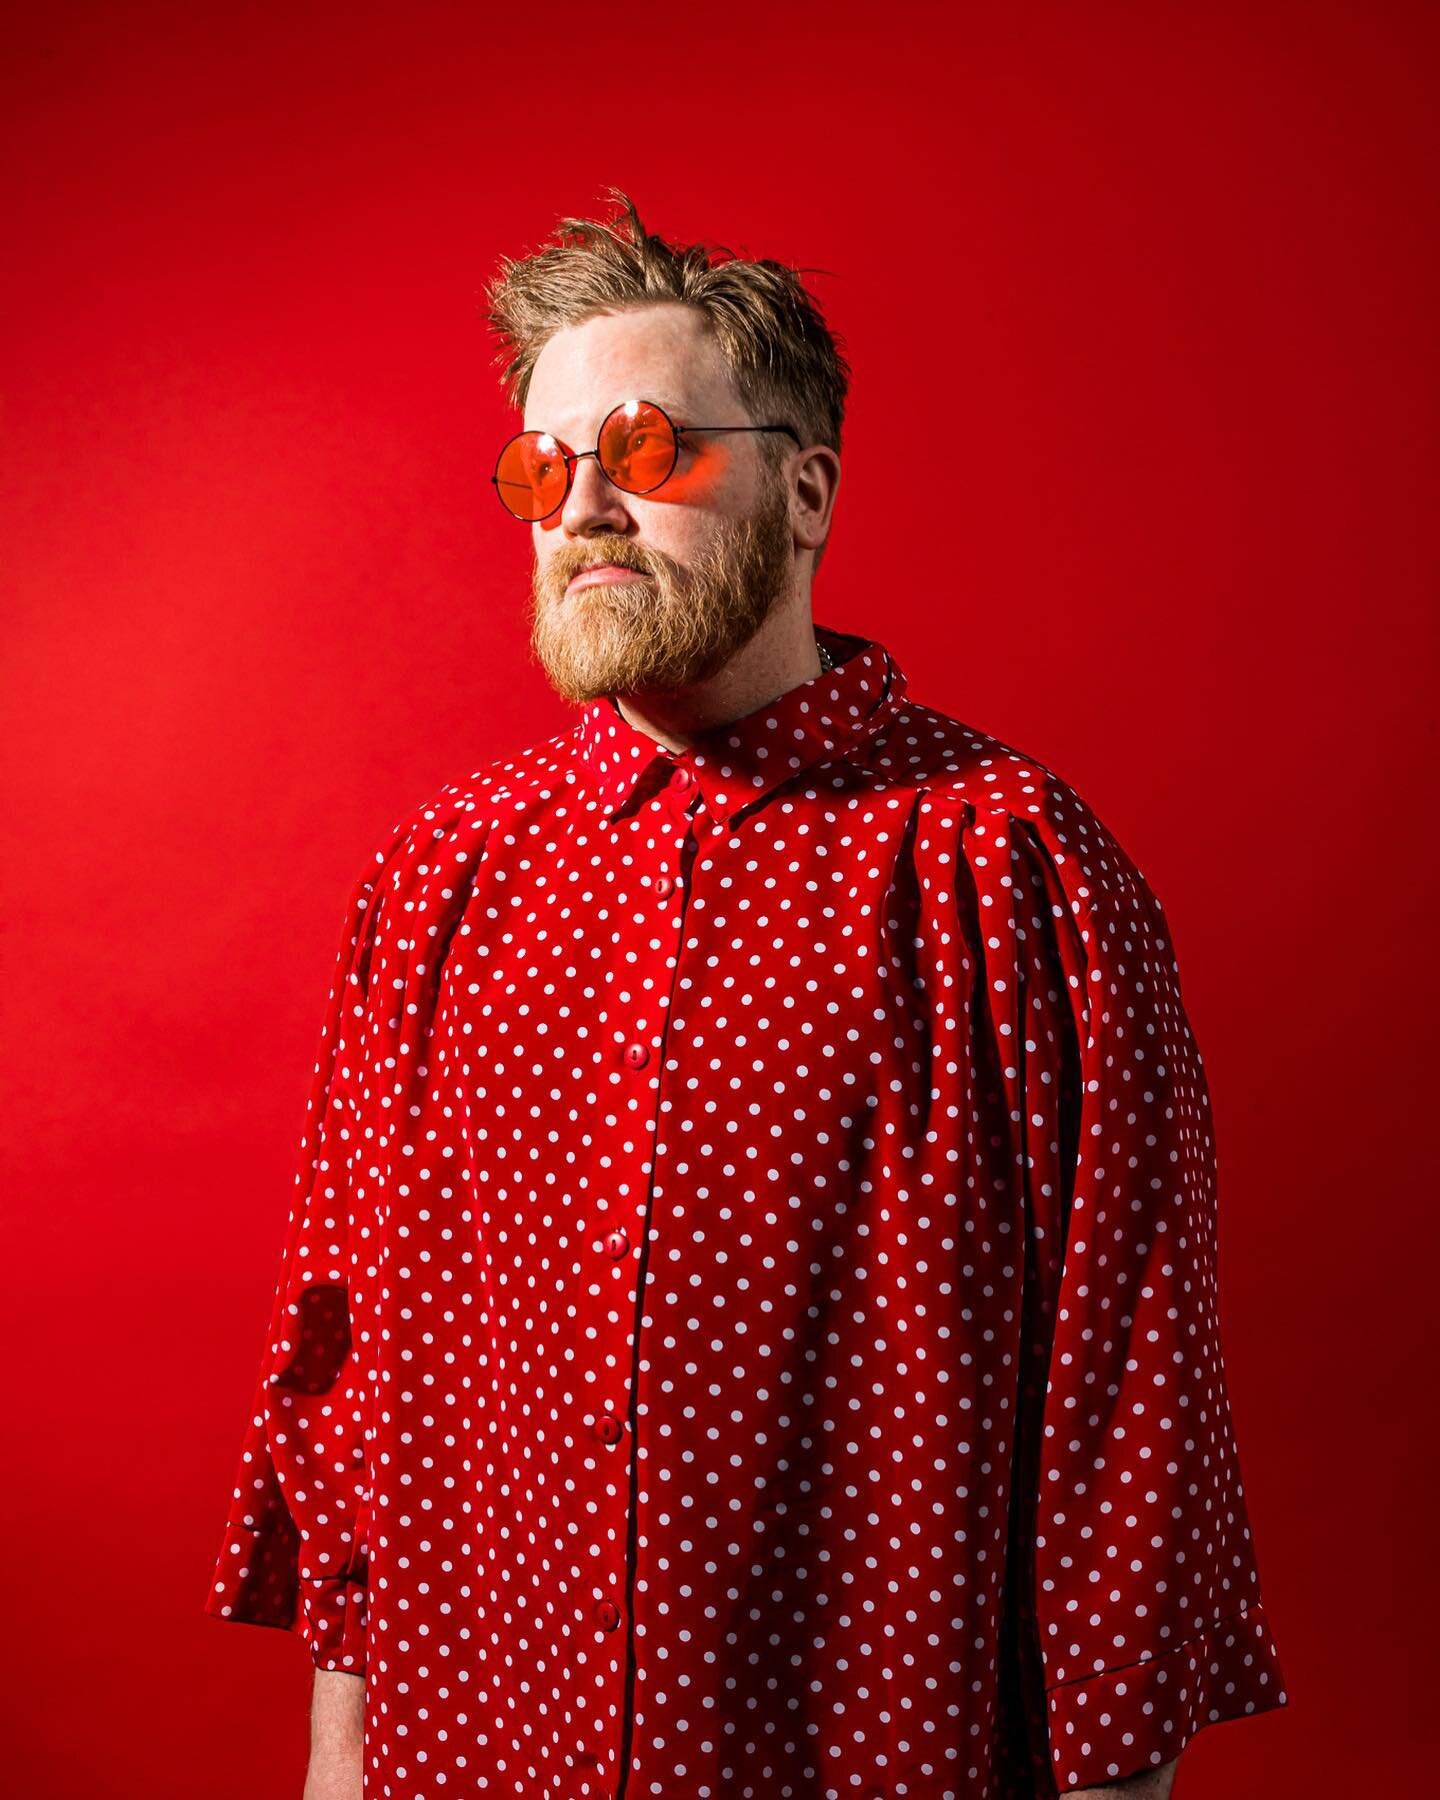 💄💋🖤⚰️. Besos portrait of HG by the GOAT @joshfoolovesyou #red #polkadot #portrait #photography #omaha #producer #beatmaker #cousin #red #redtheme #redaesthetic #red #yee